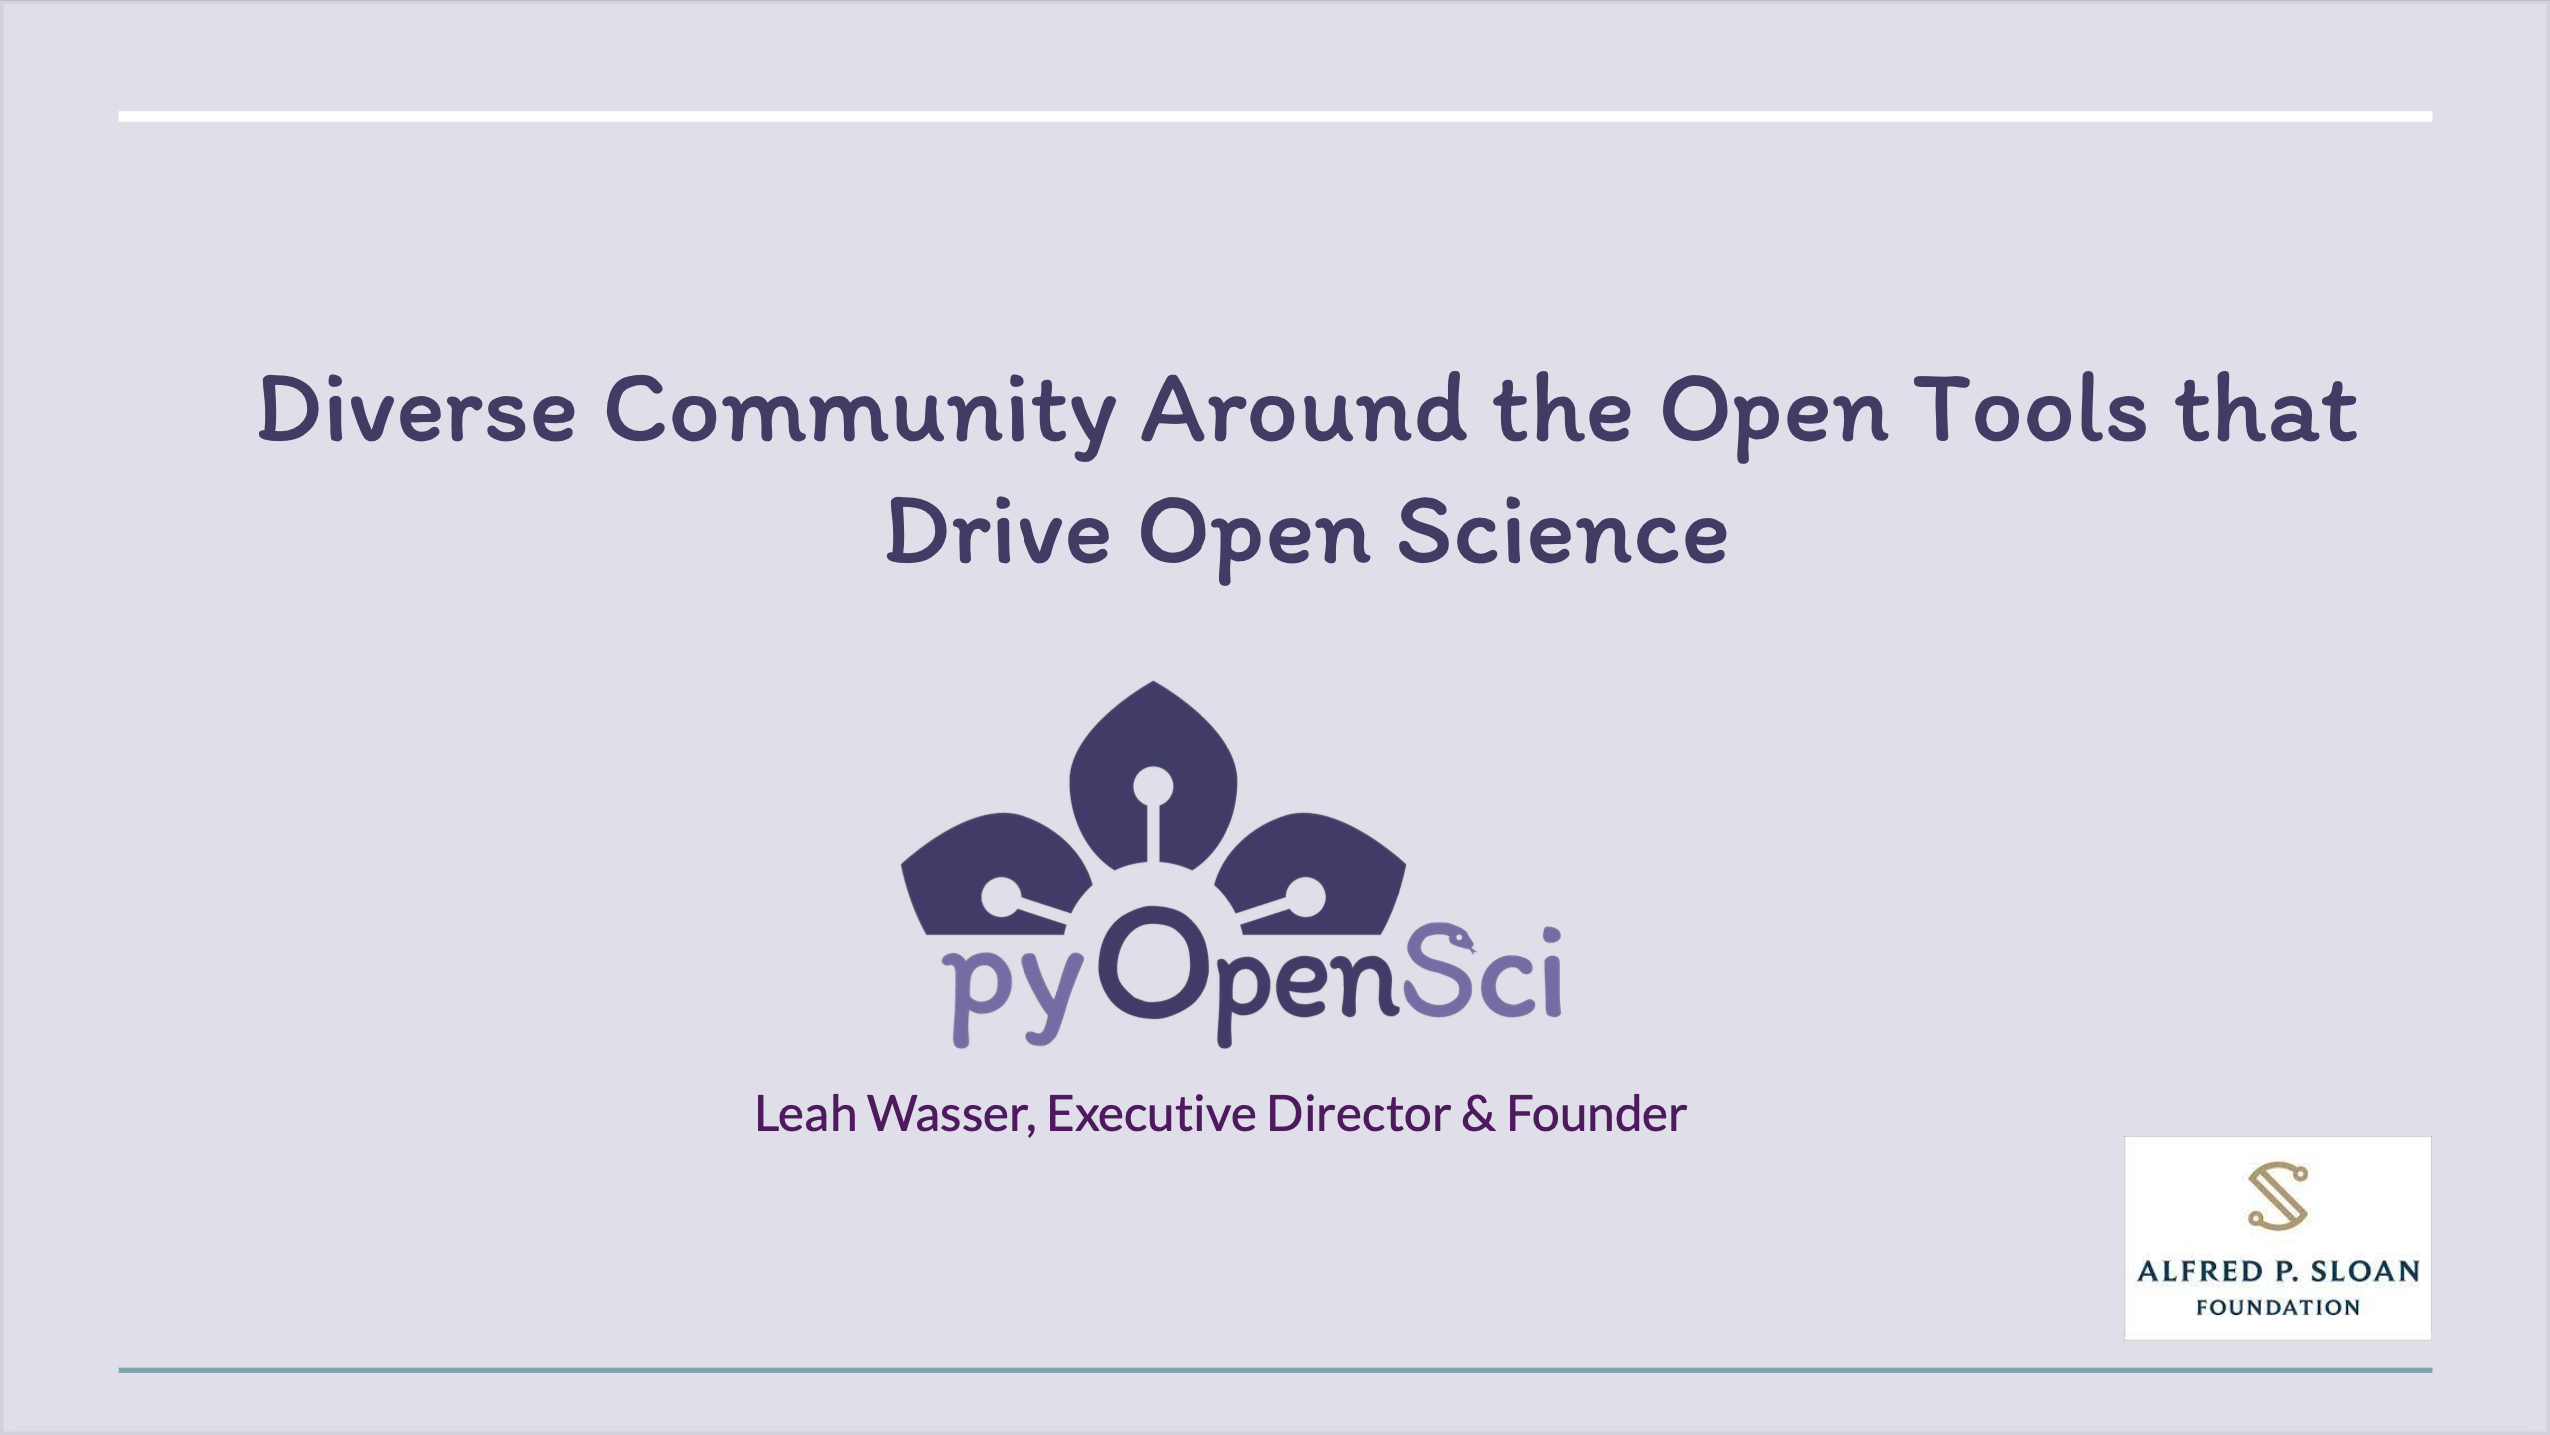 «pyOpenSci – Diverse Community Around the Open Tools that Drive Open Science» by Leah Wasser